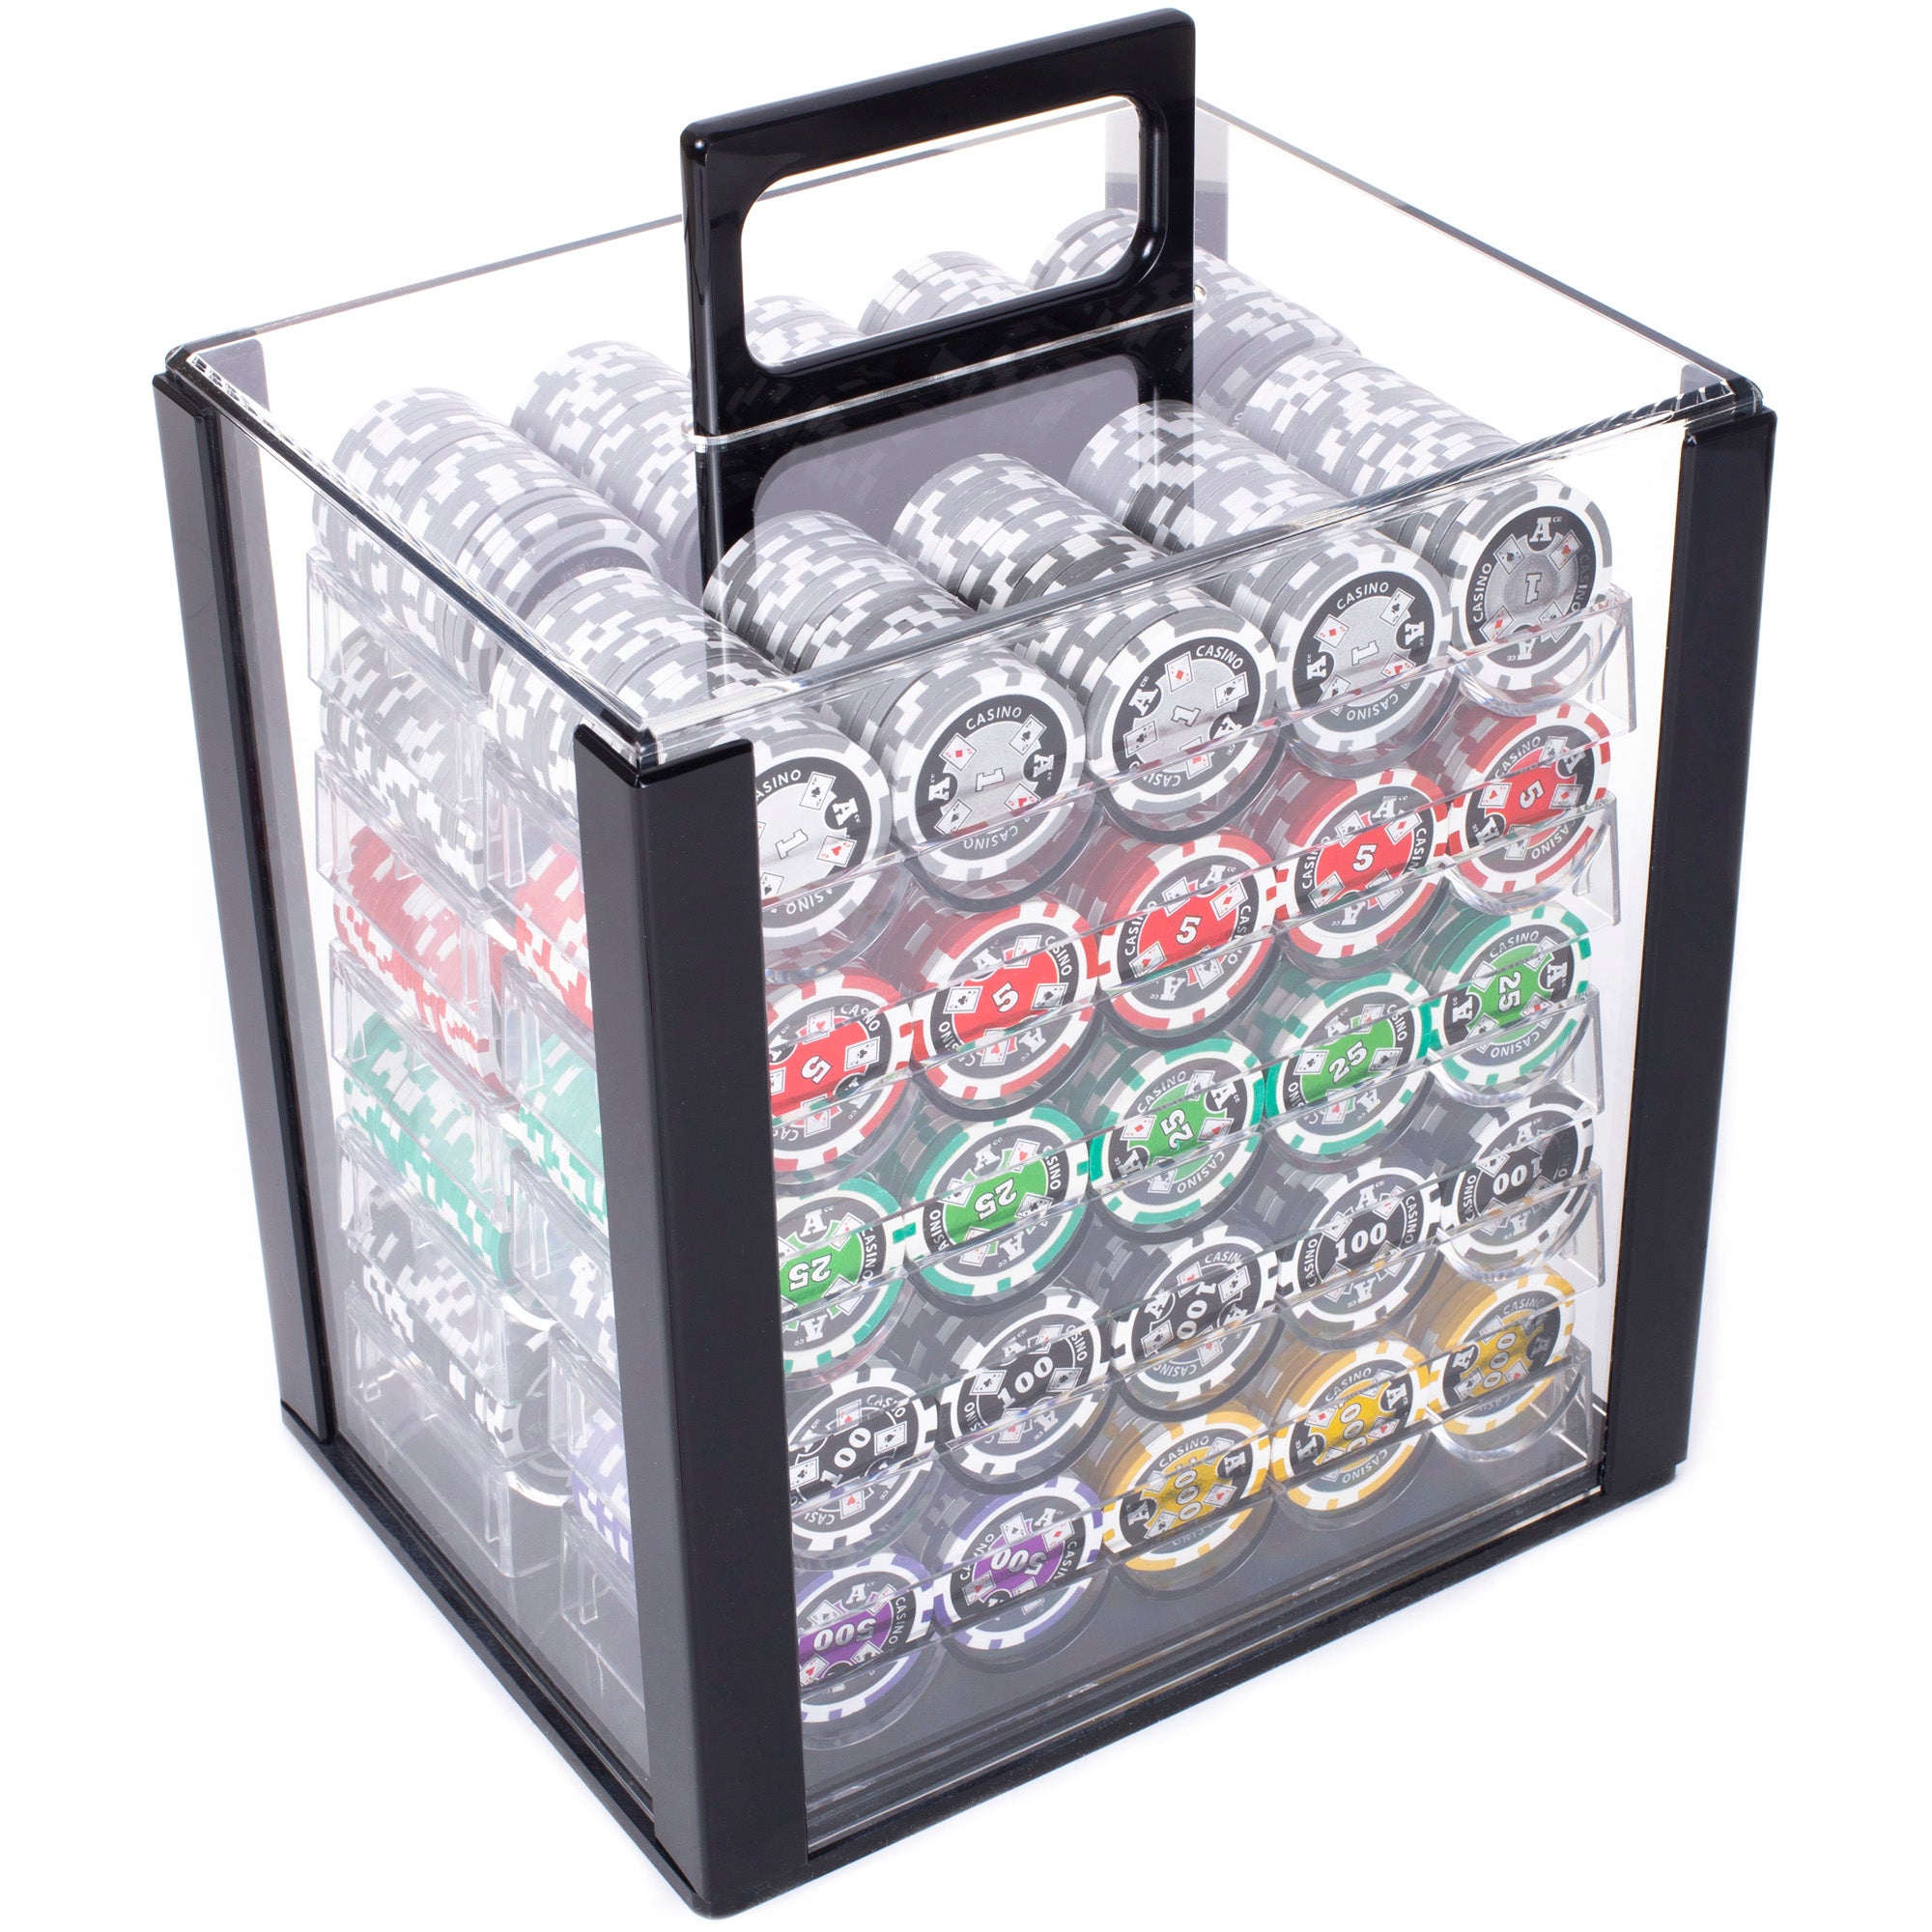 1000 Ace Casino Acrylic Poker Chip Set. 14 Gram Heavy Weighted Poker Chips.